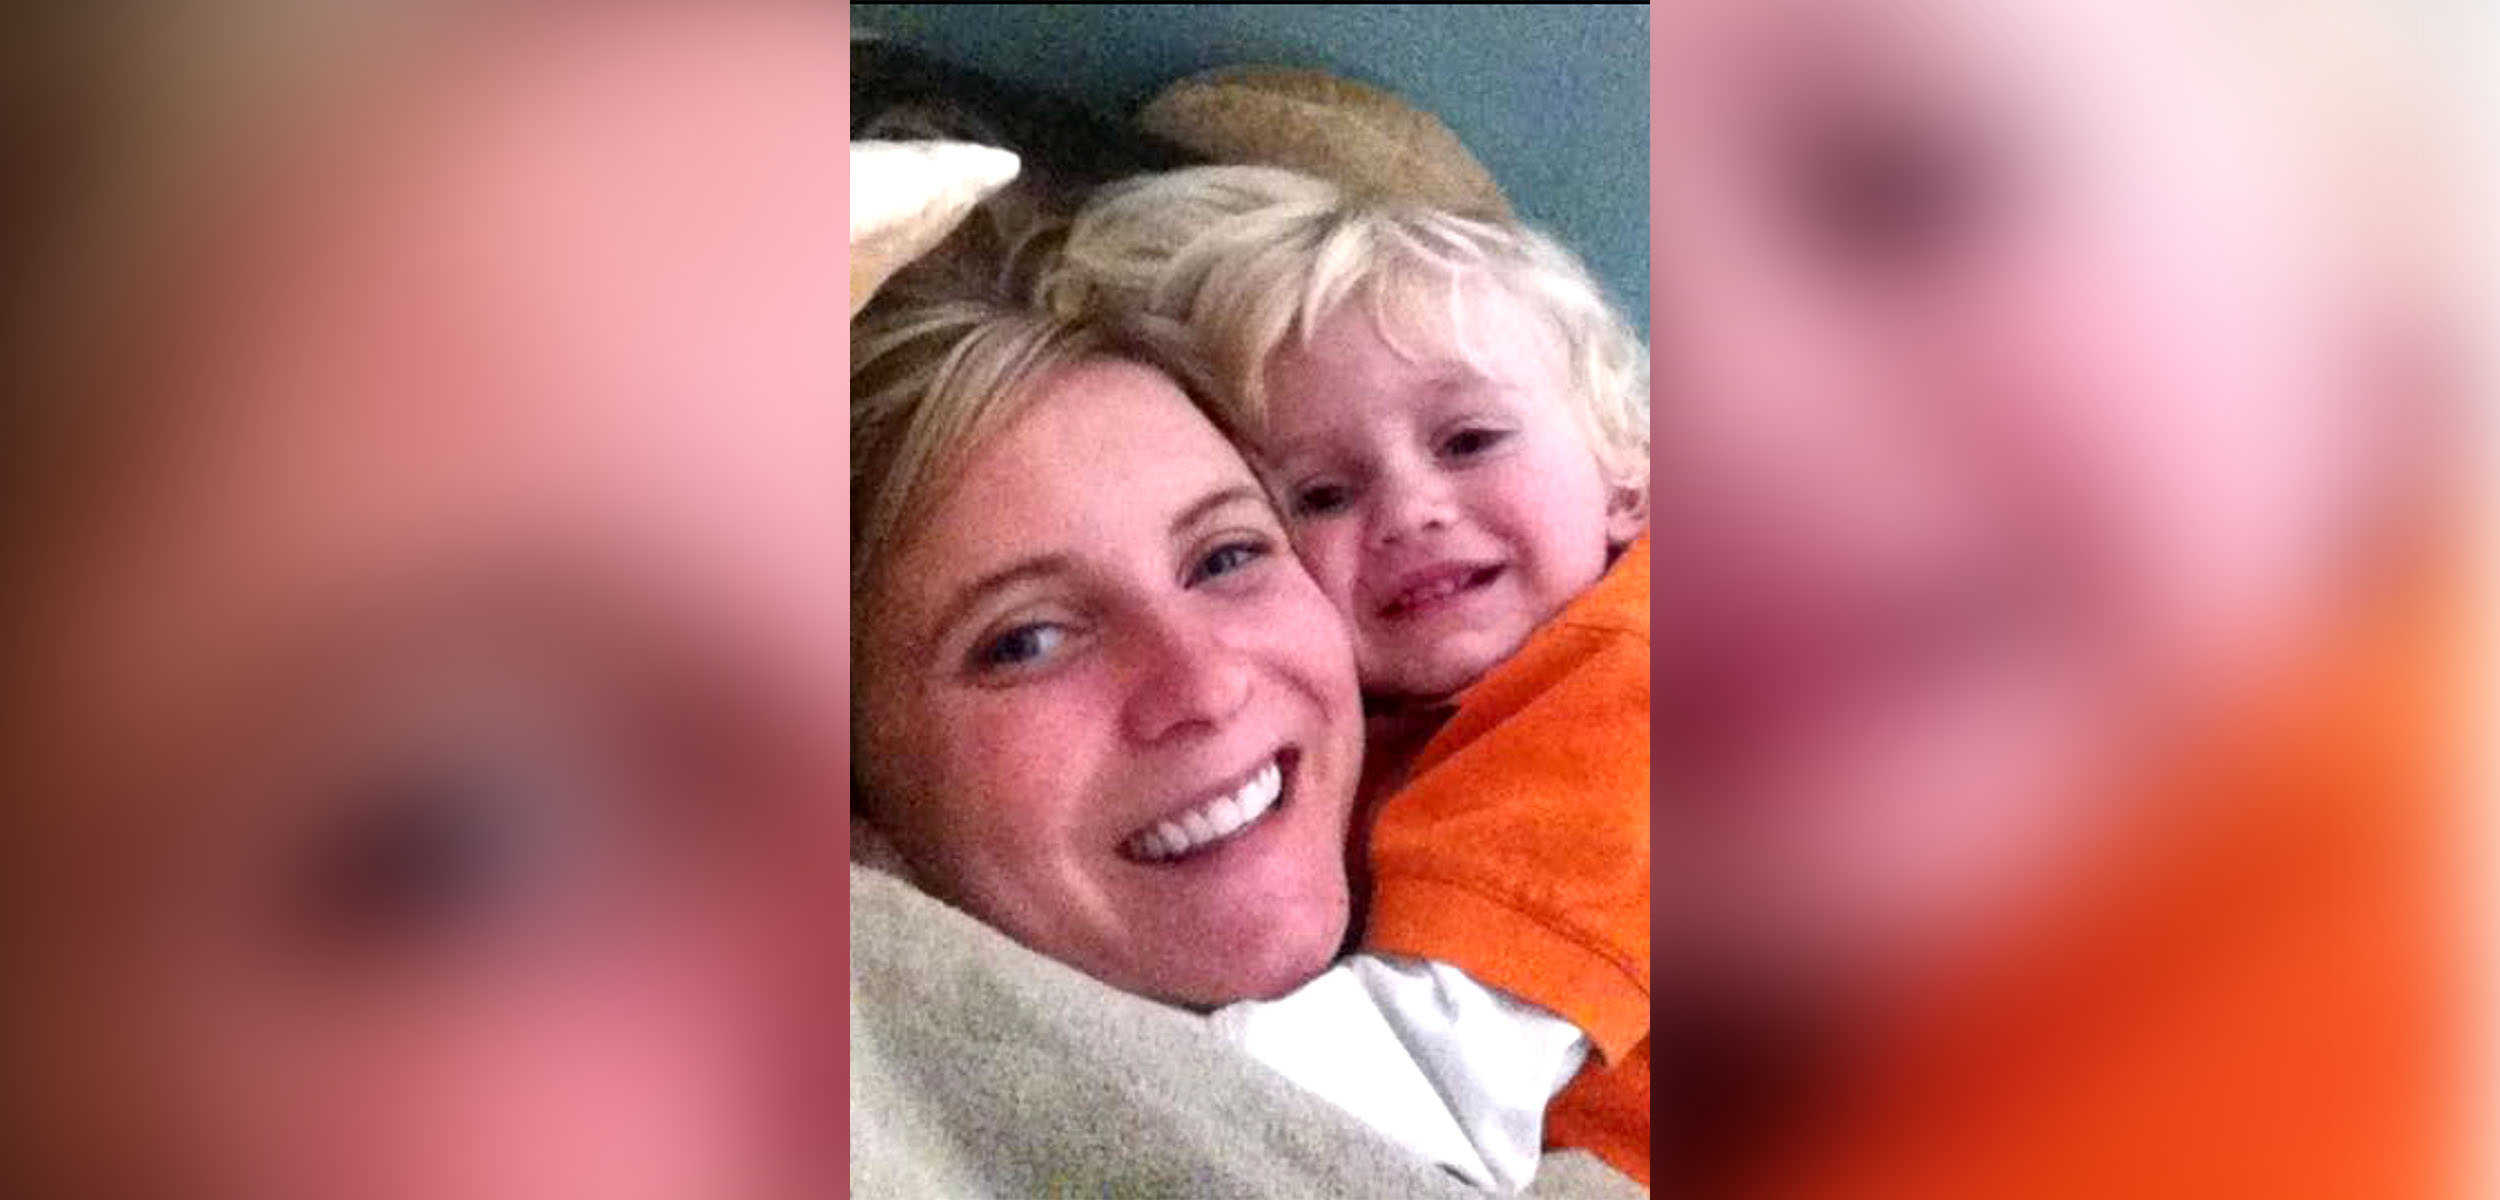 PHOTO: Evan, now 7, seen with his mother Kellie in this undated photo.